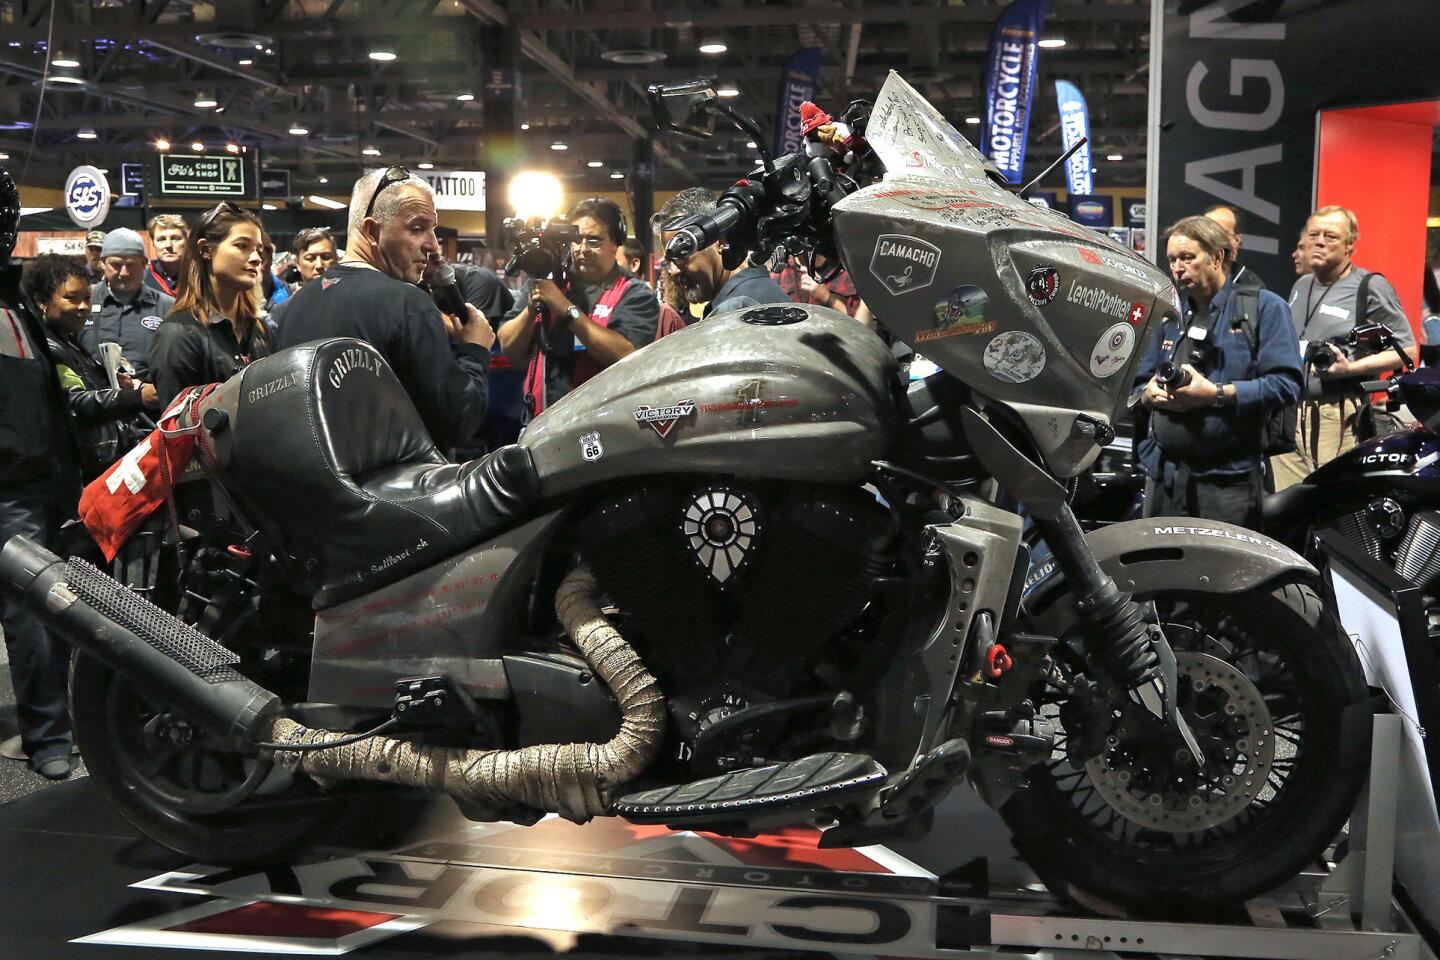 Long Beach motorcycle show